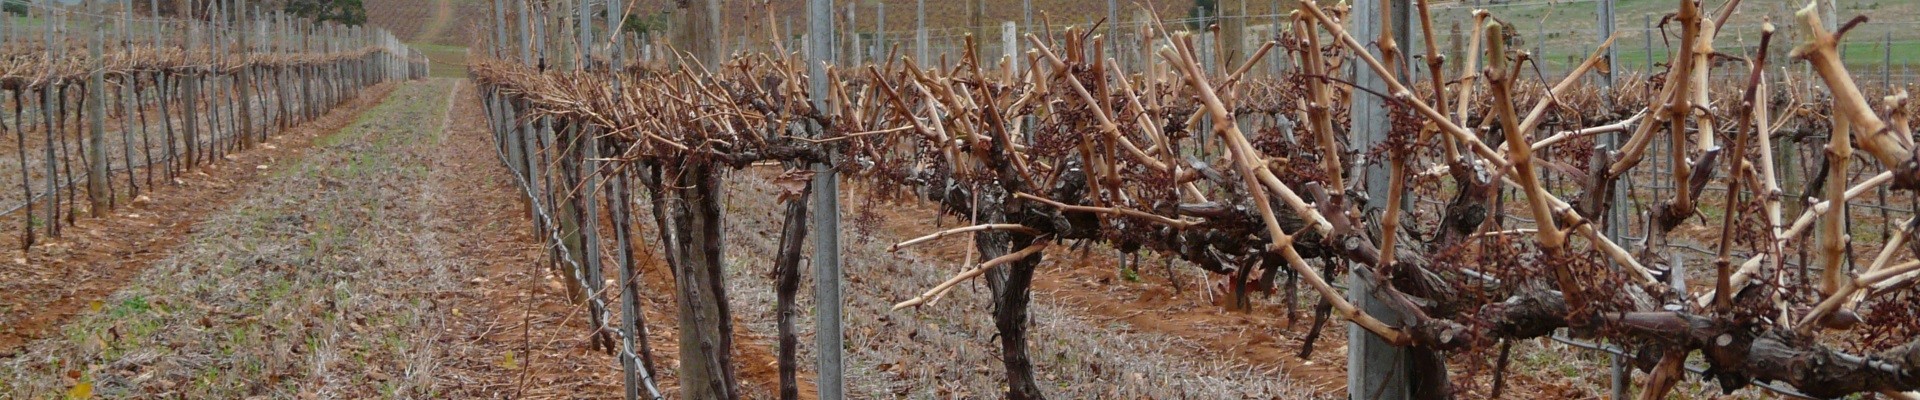 Pruned vines with Ackland Vineyard Services